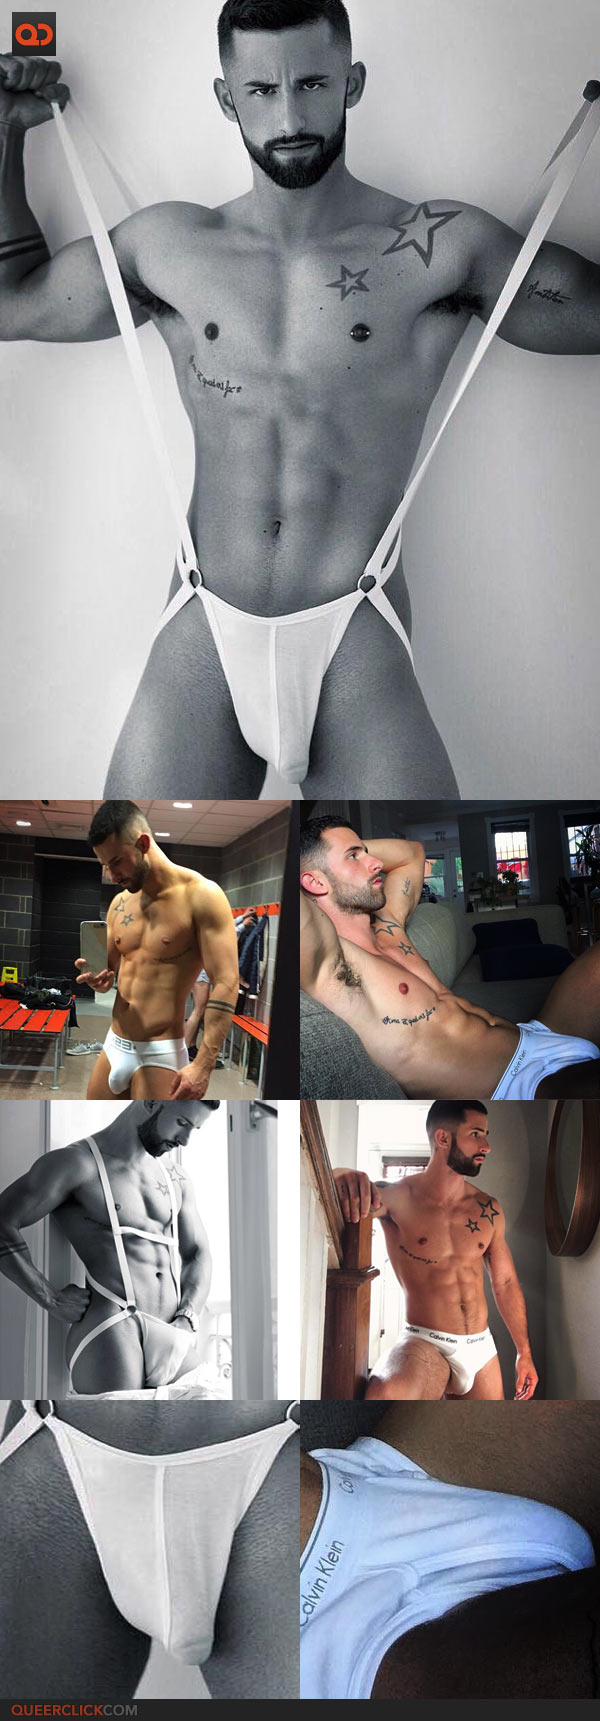 Nine BULGEtastic Fitness Models You Need To Follow On Instagram! – Part 3